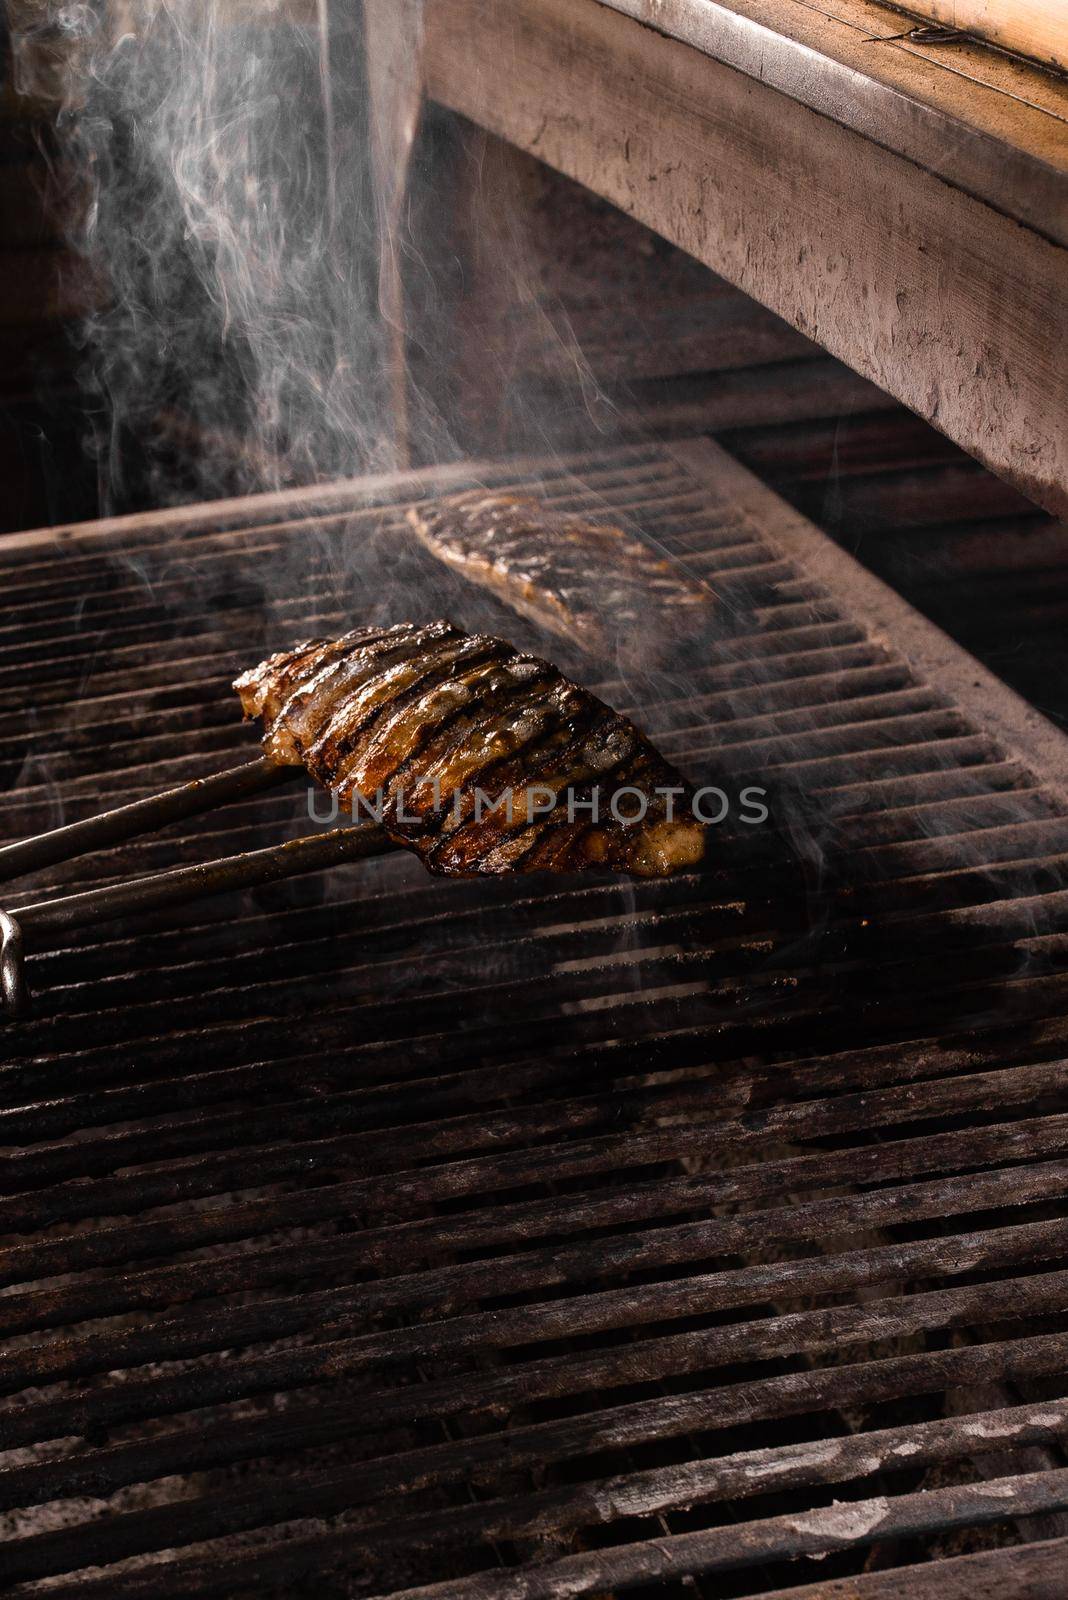 Grilling chicken fillets with metal tongs. The cook prepares a barbecue dish.